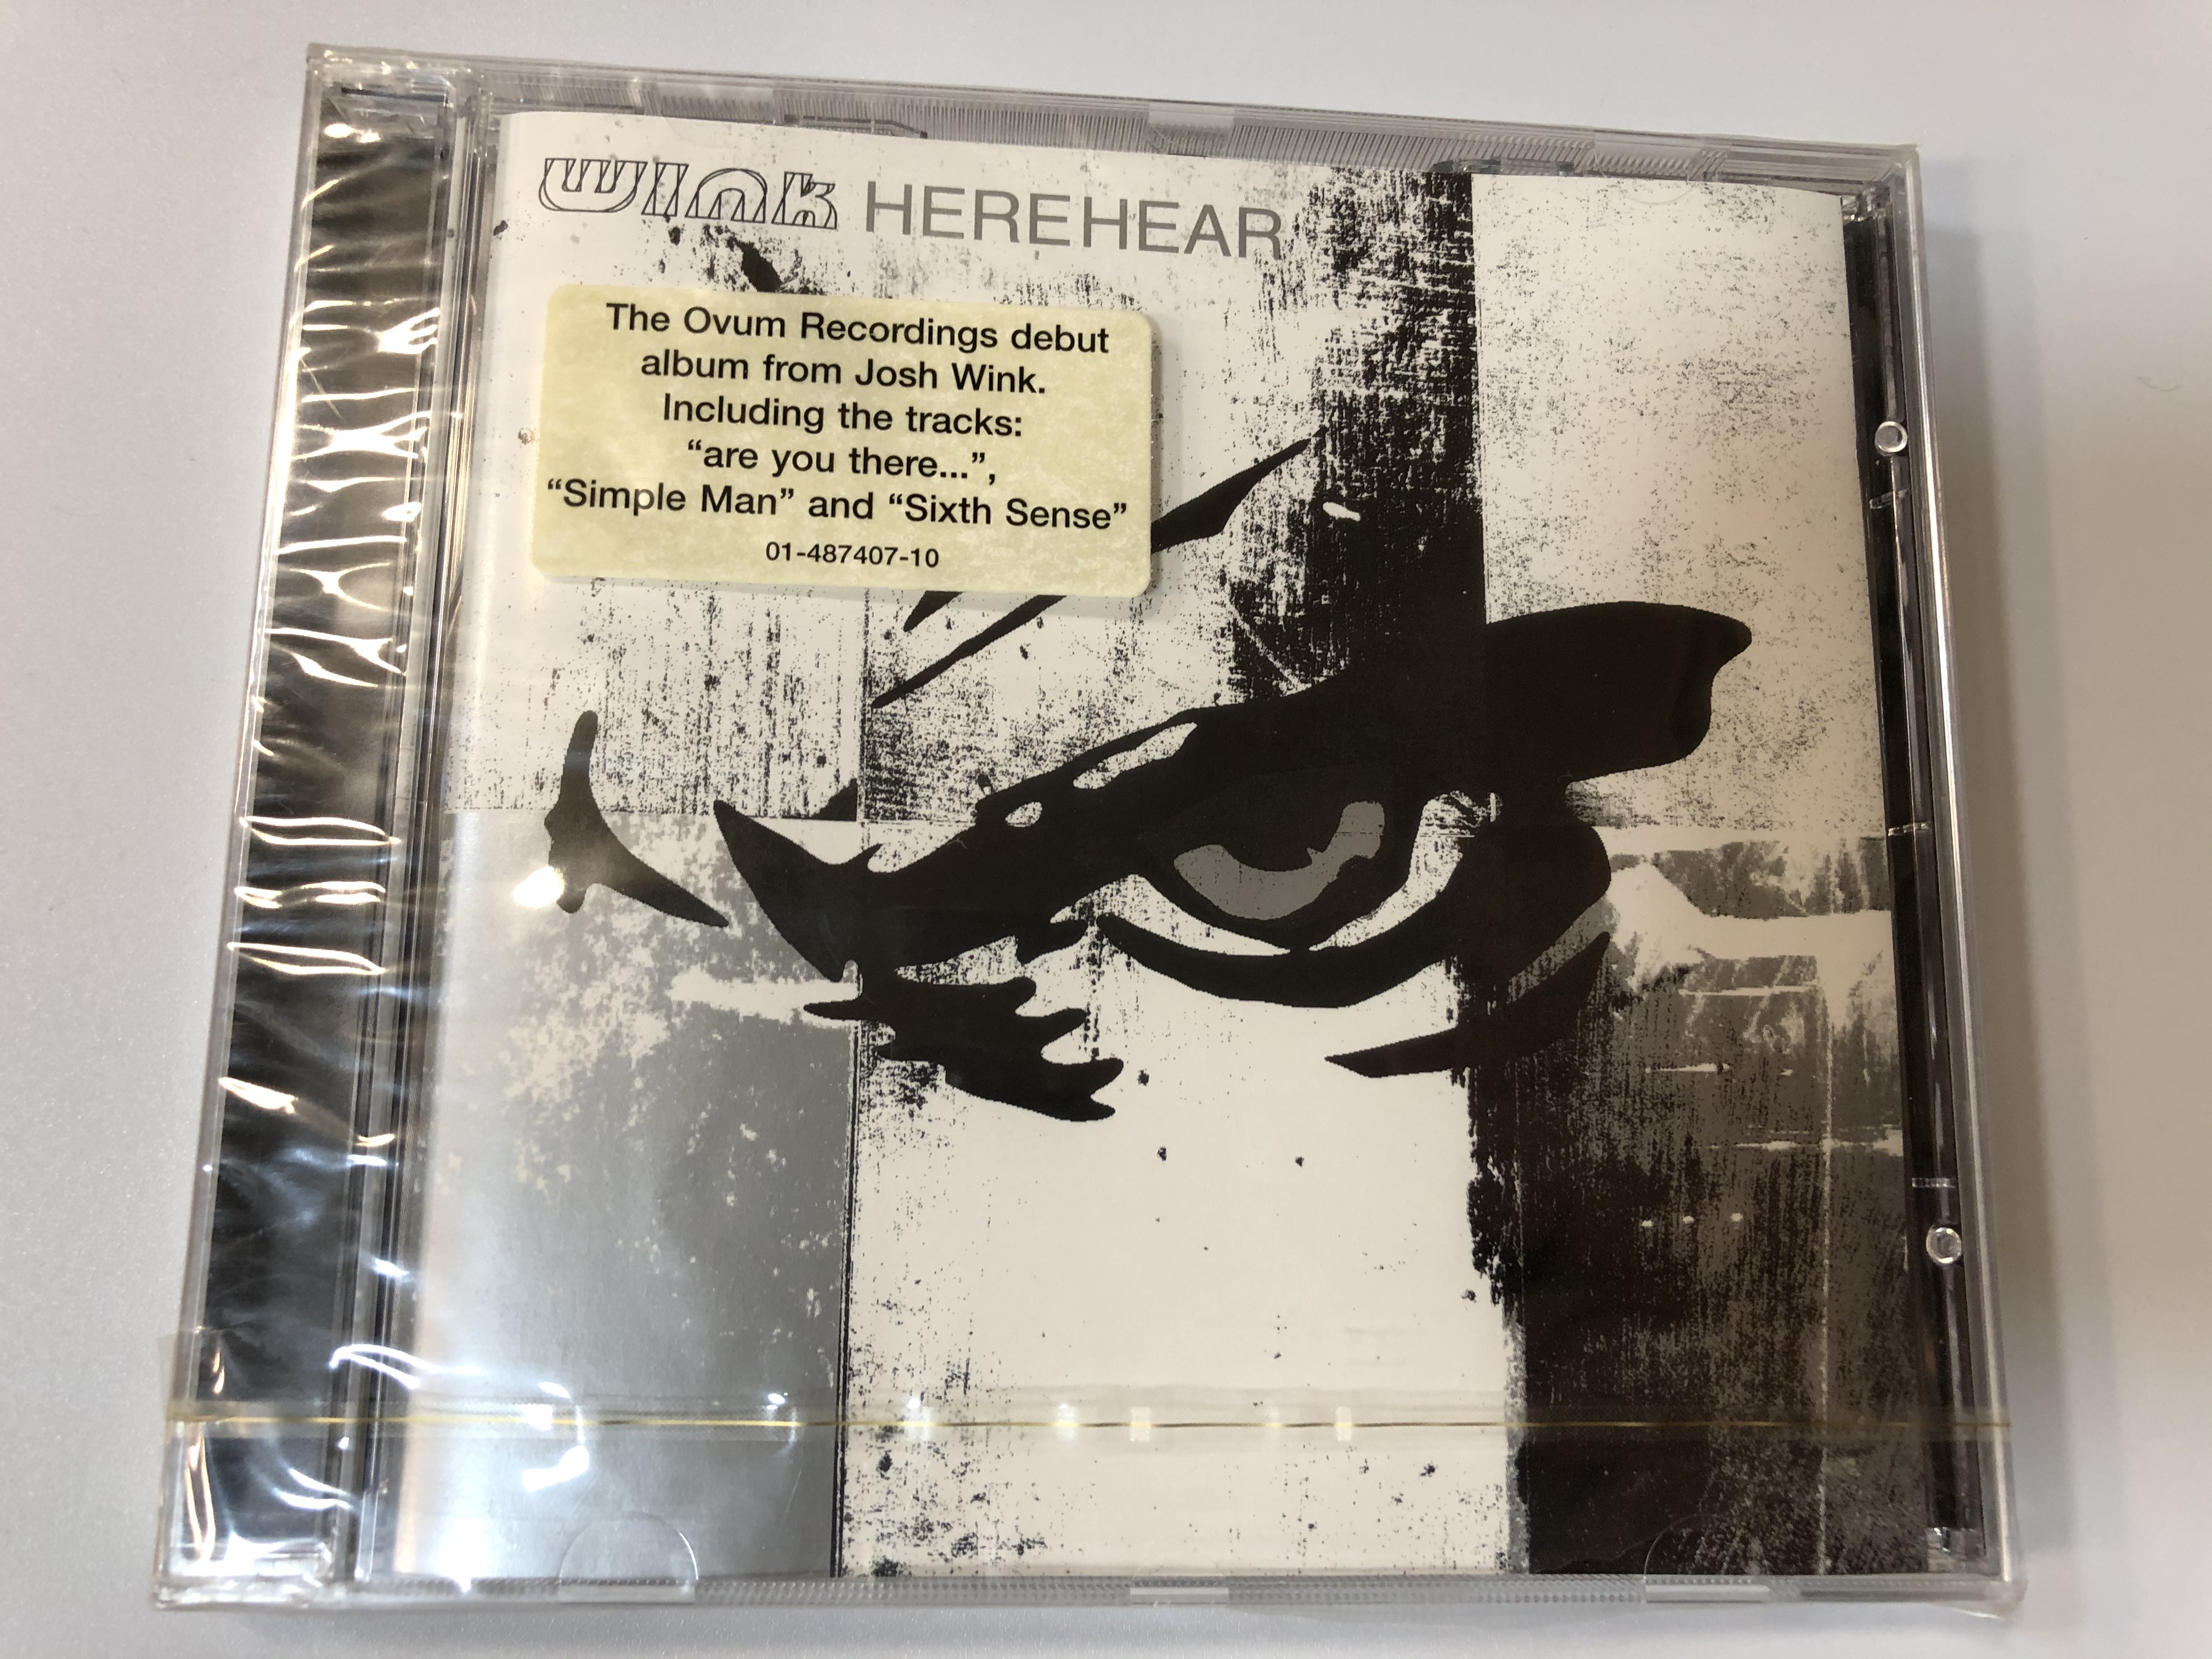 wink-herehear-the-ovum-recordings-debut-album-from-josh-wink.-including-the-tracks-are-you-there...-simple-man-and-sixth-sense-ovum-recordings-audio-cd-1998-487407-2-1-.jpg